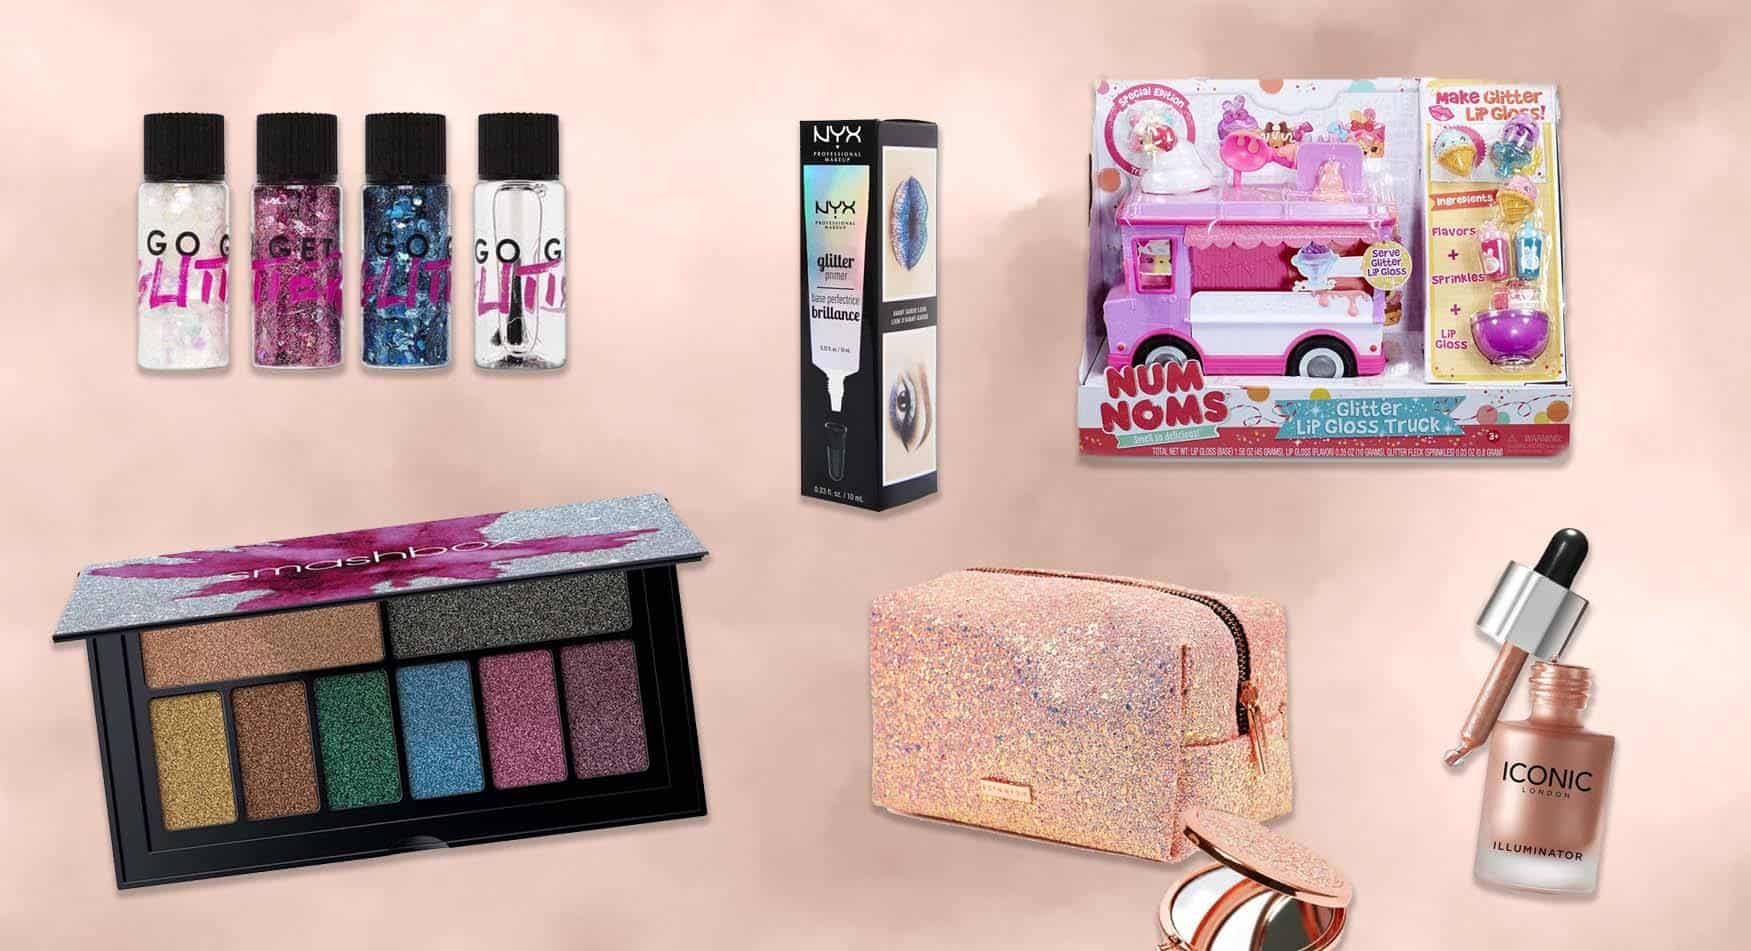 Get Insanely Beautiful with Glitter during this Holiday Season